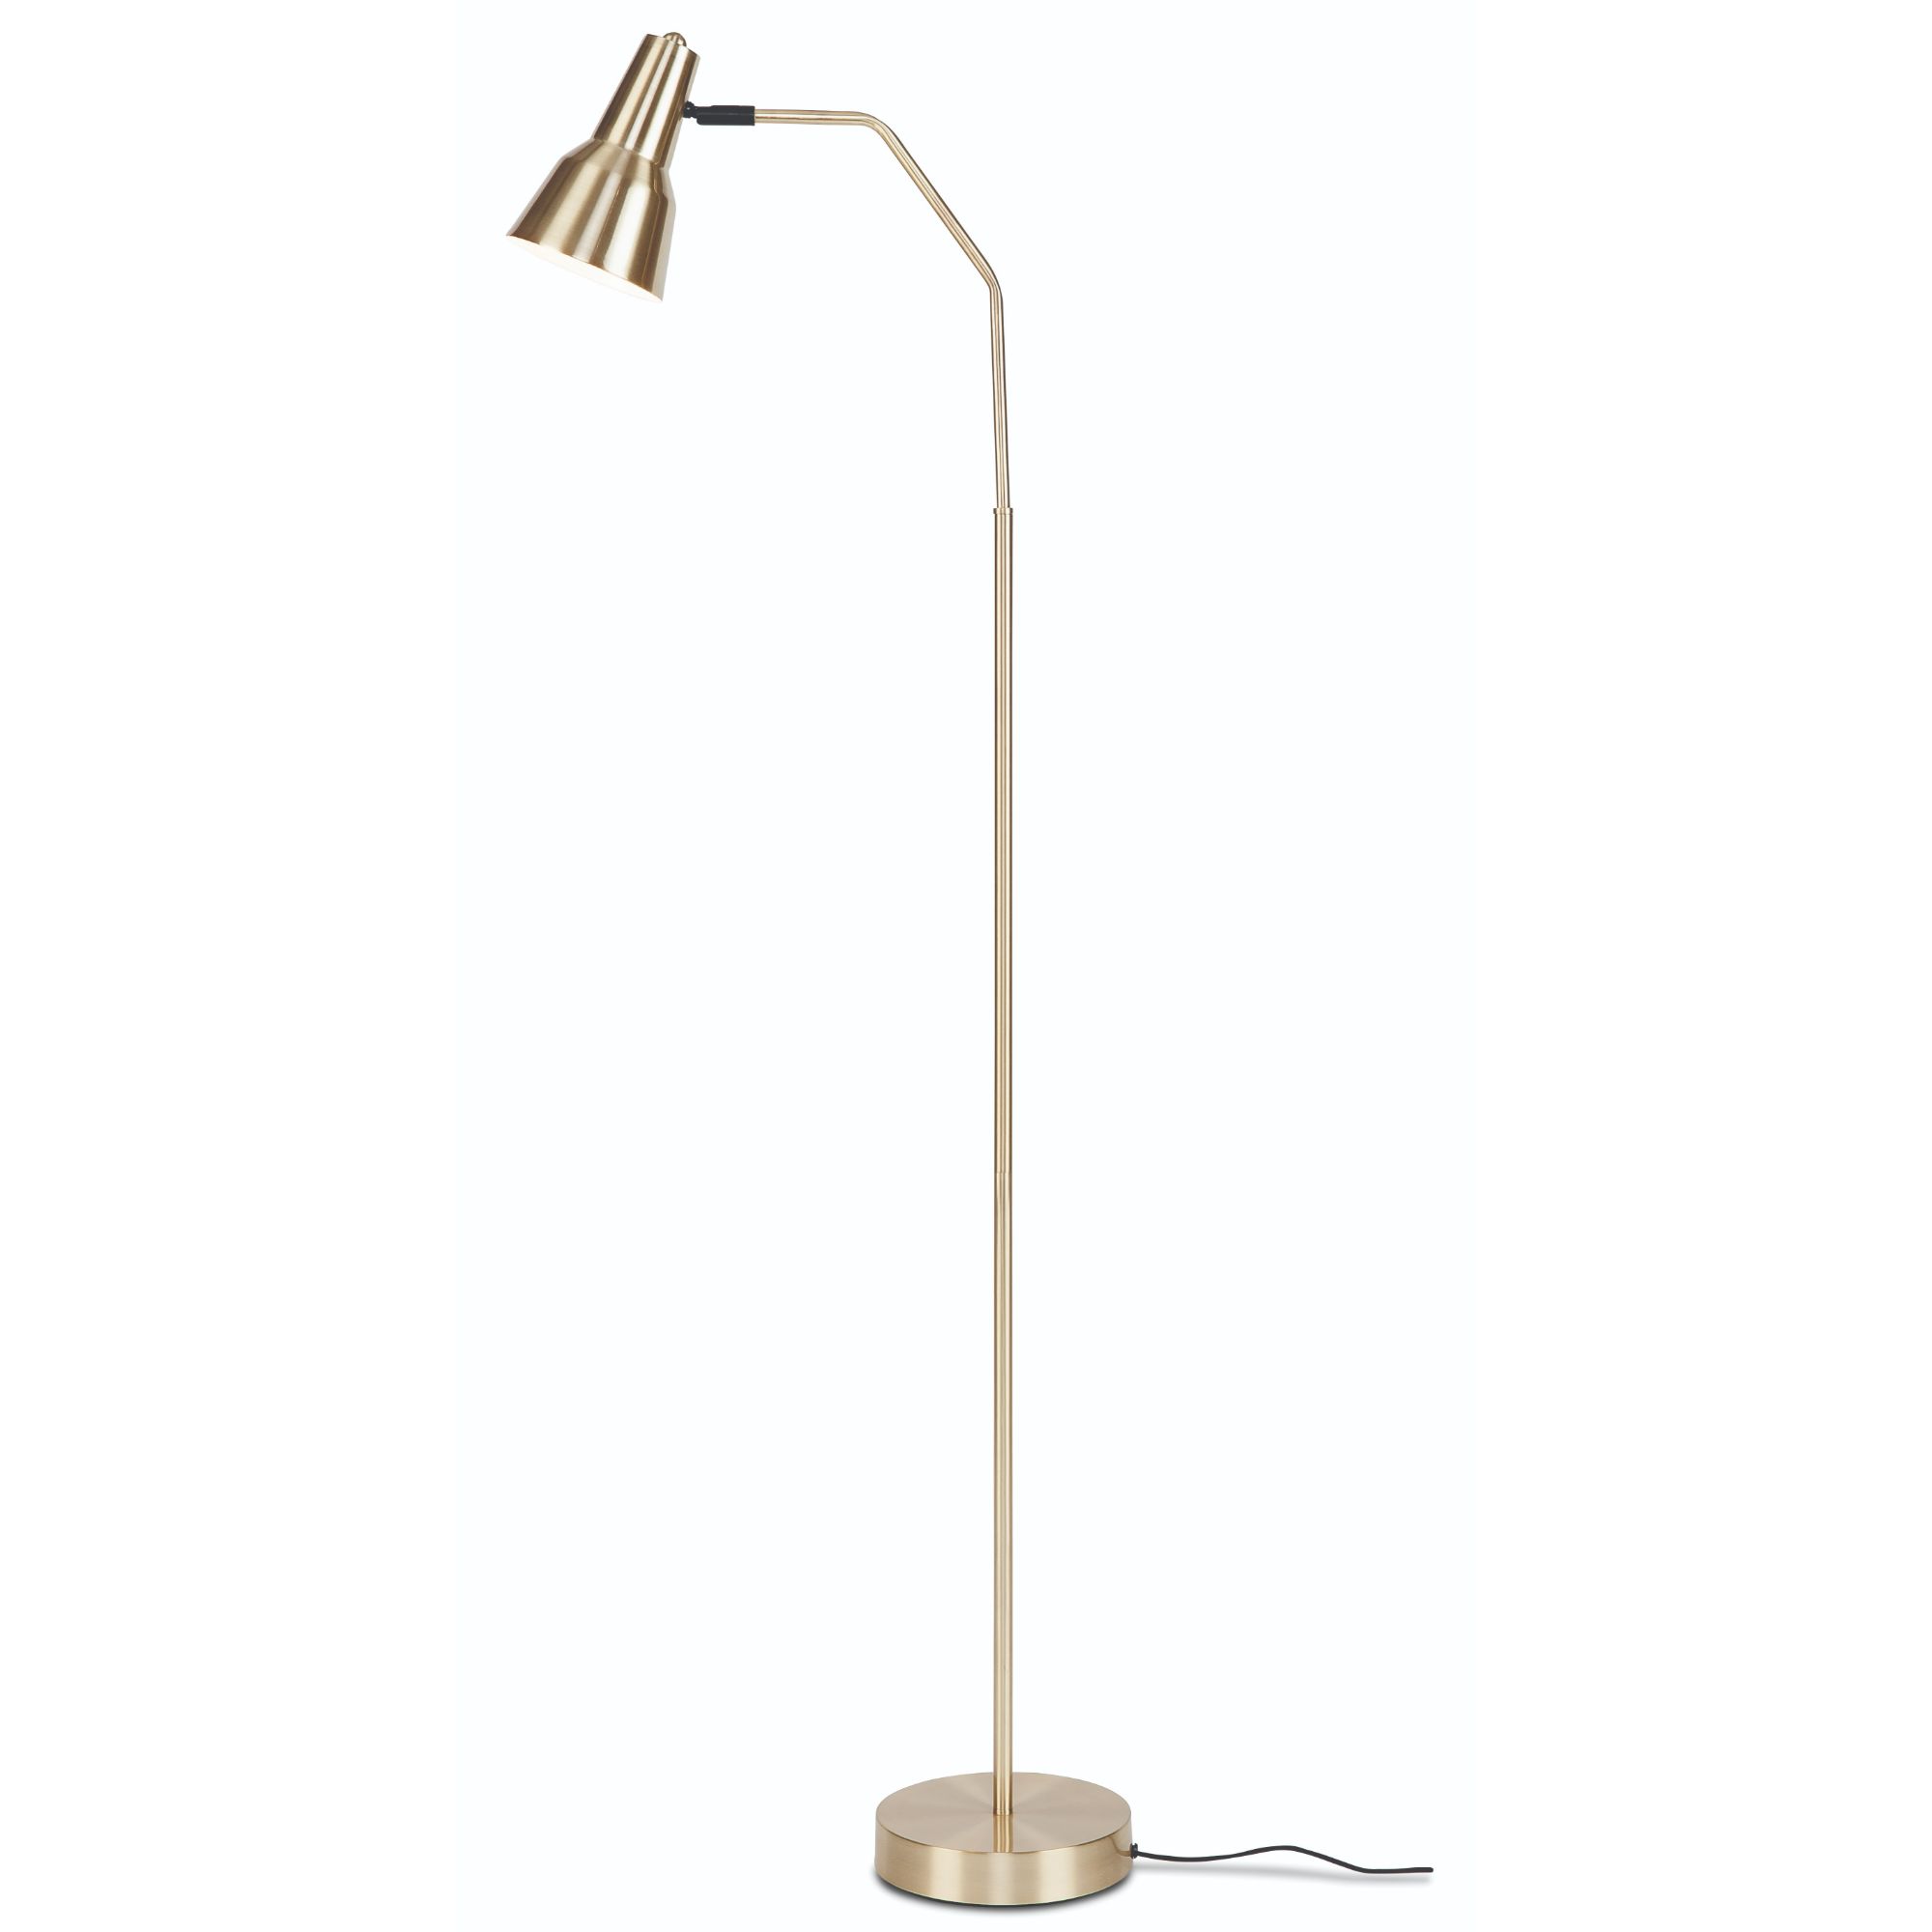 it's about RoMi - Valencia - Vloerlamp - Goud